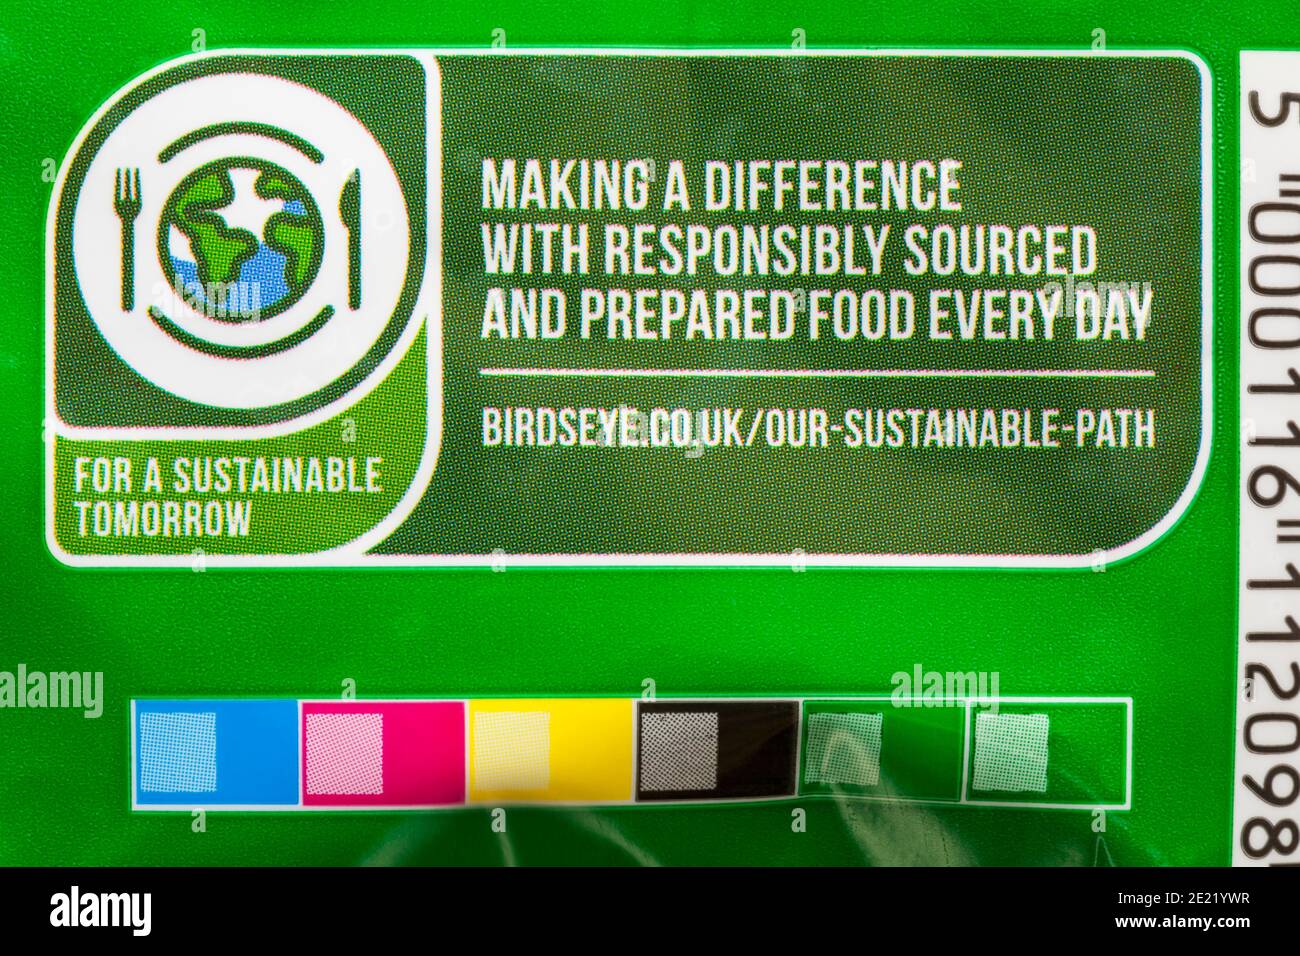 For a sustainable tomorrow, making a difference with responsibly sourced and prepared food every day - detail on pack of frozen Birds Eye Garden peas Stock Photo